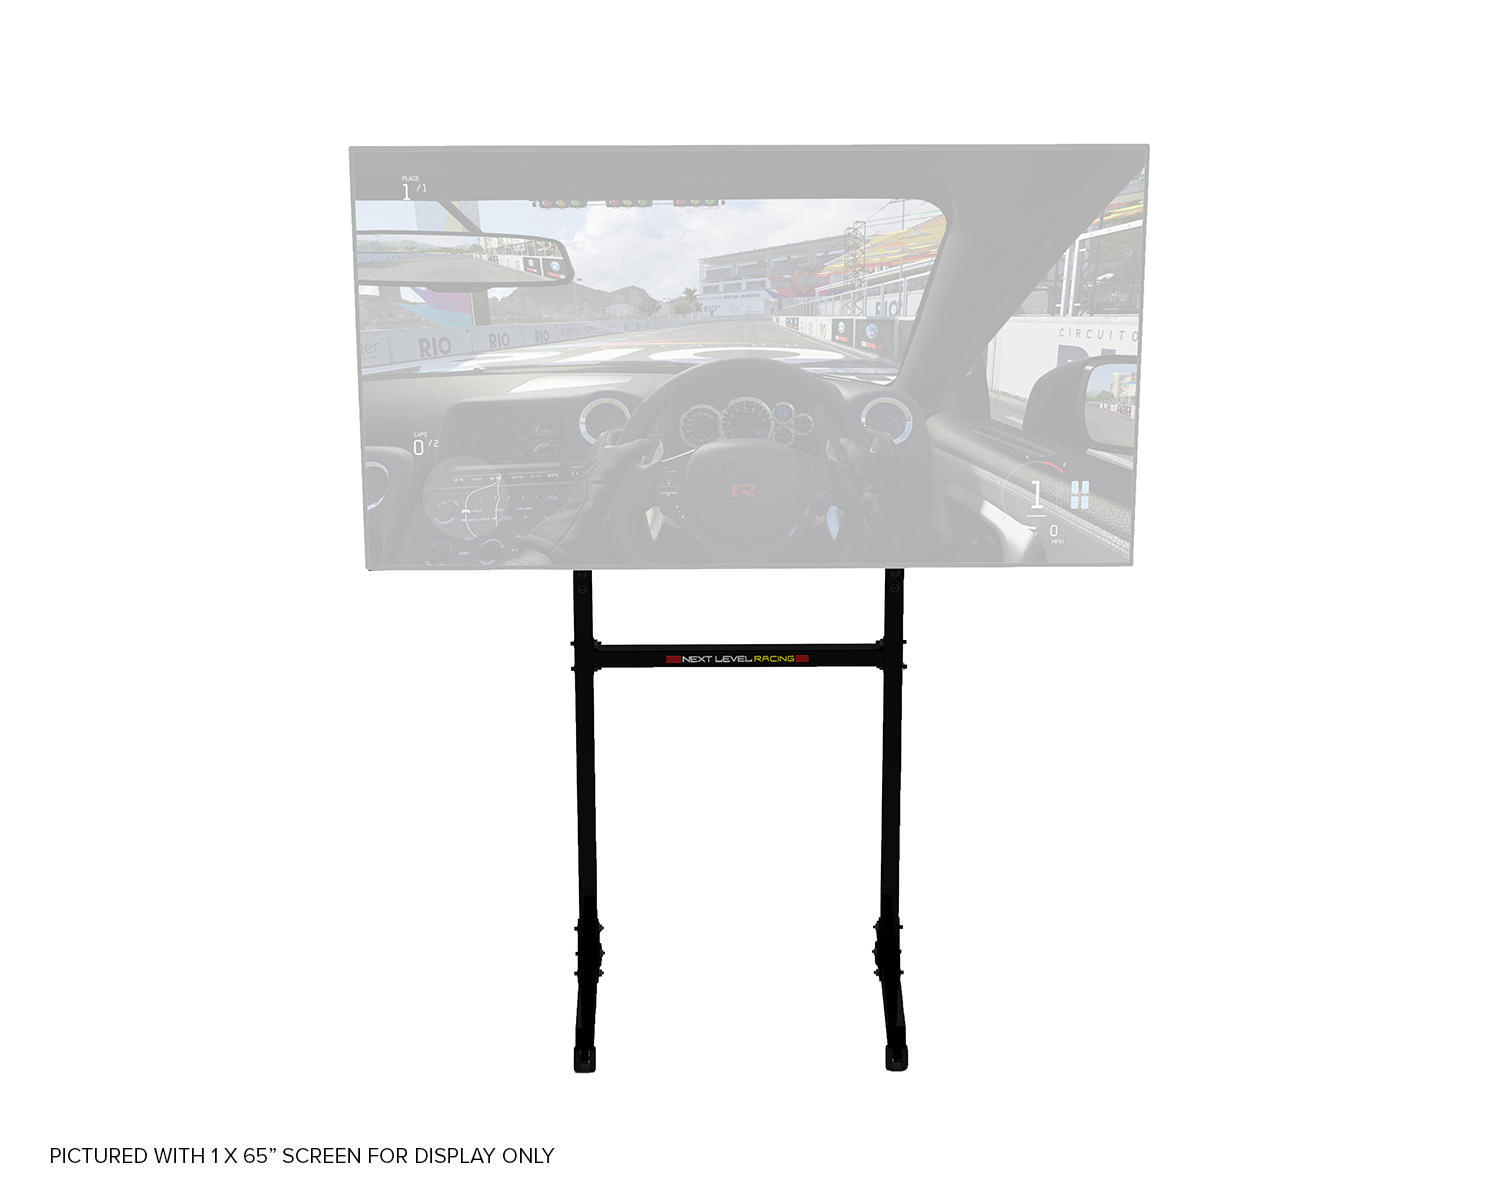 NEXT LEVEL RACING ® Stand Monitor Single Standing Free